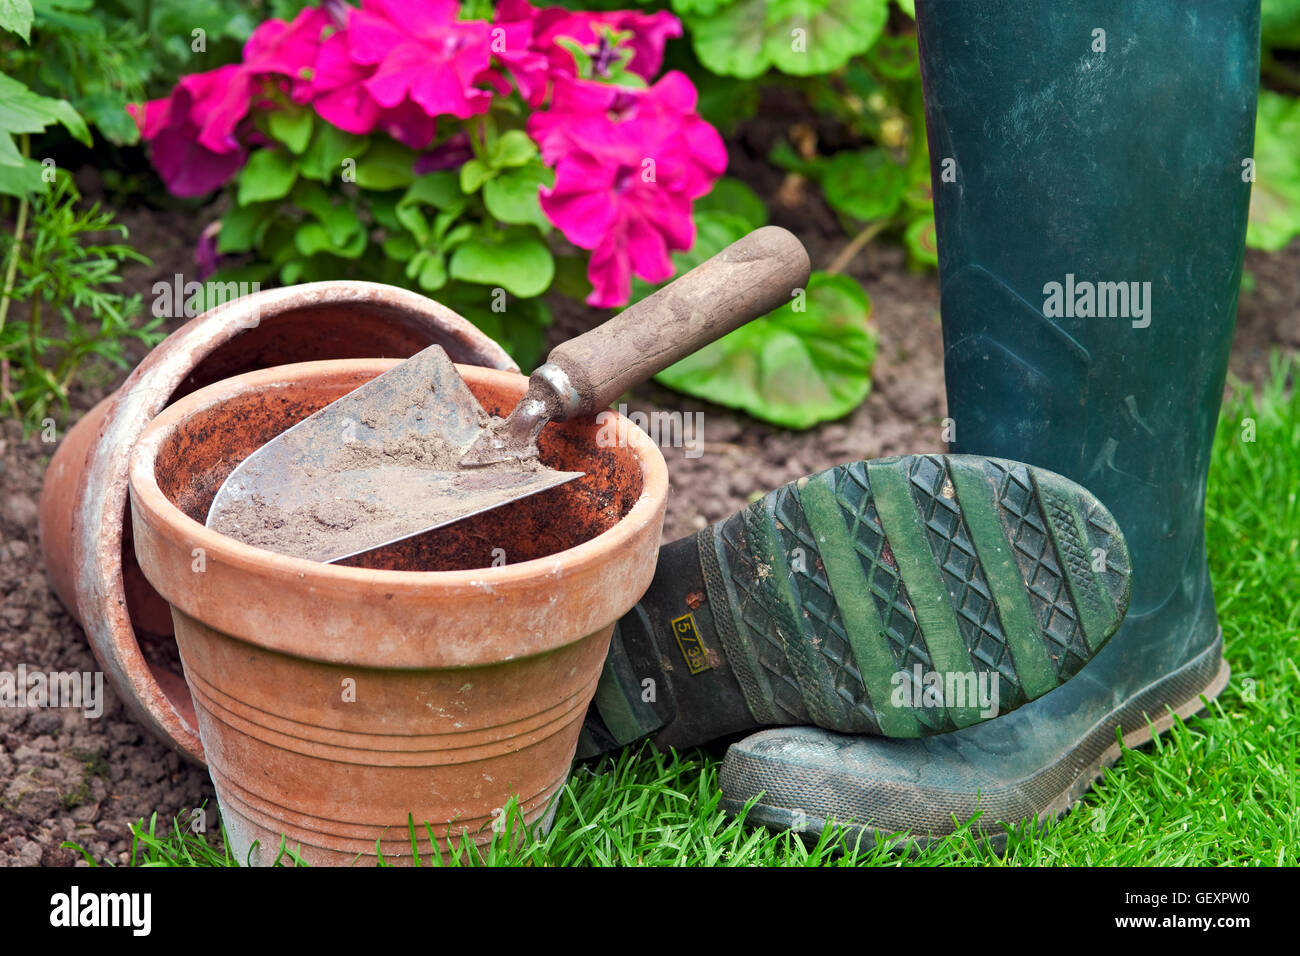 Clay pots and a garden trowel. Stock Photo